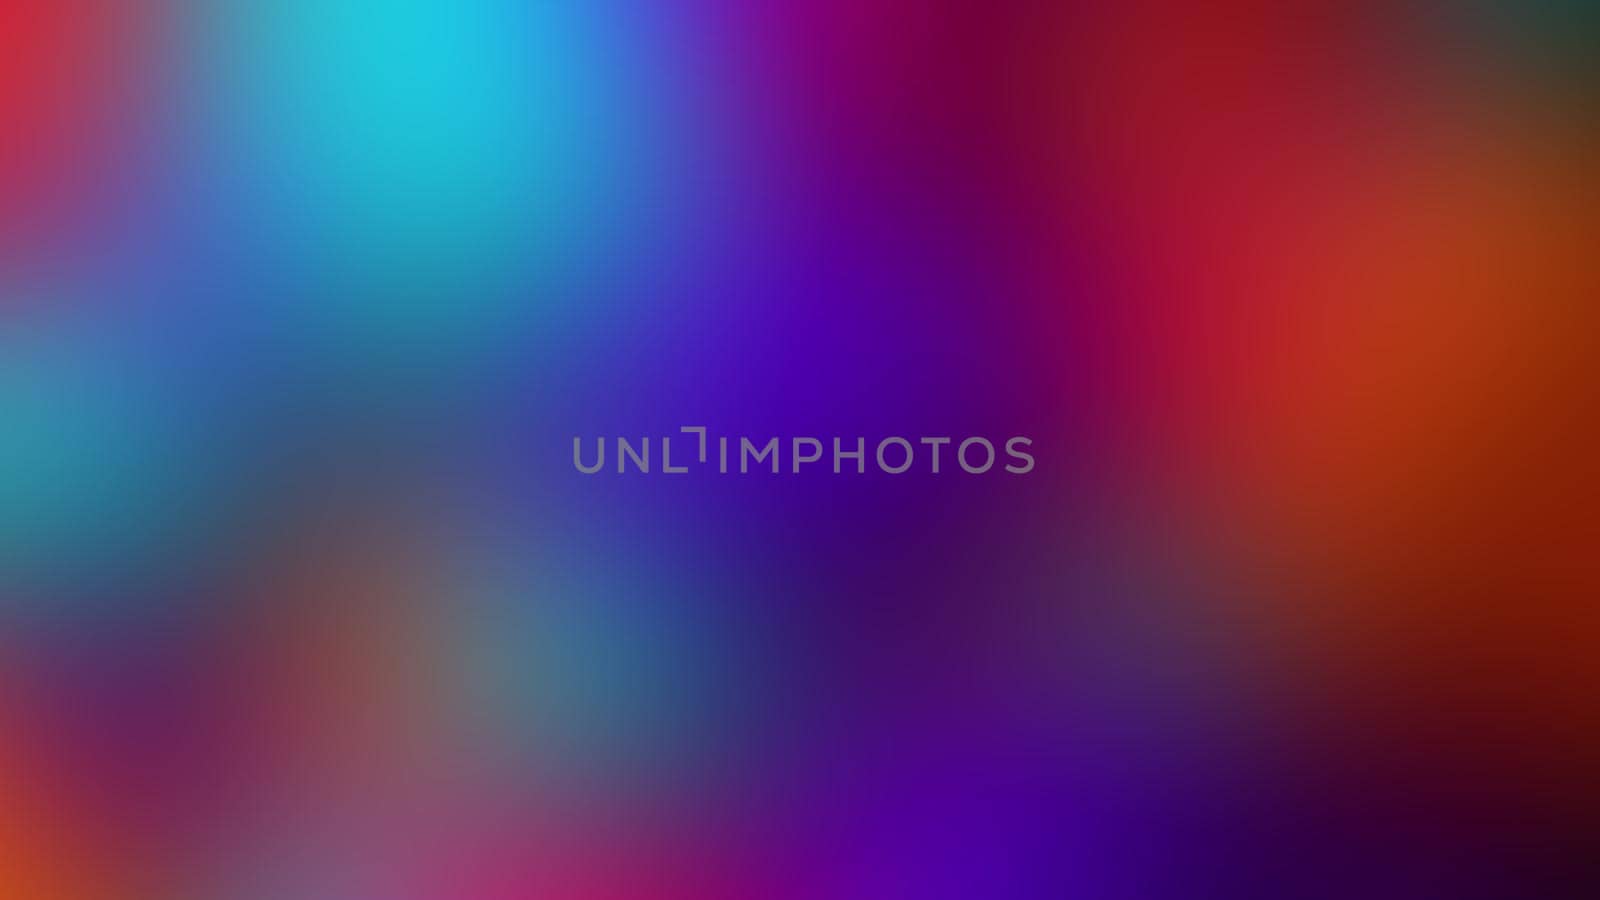 Abstract background, blurred shape with gradients effects, 3d illustration for graphic design, banner, poster, computer generated